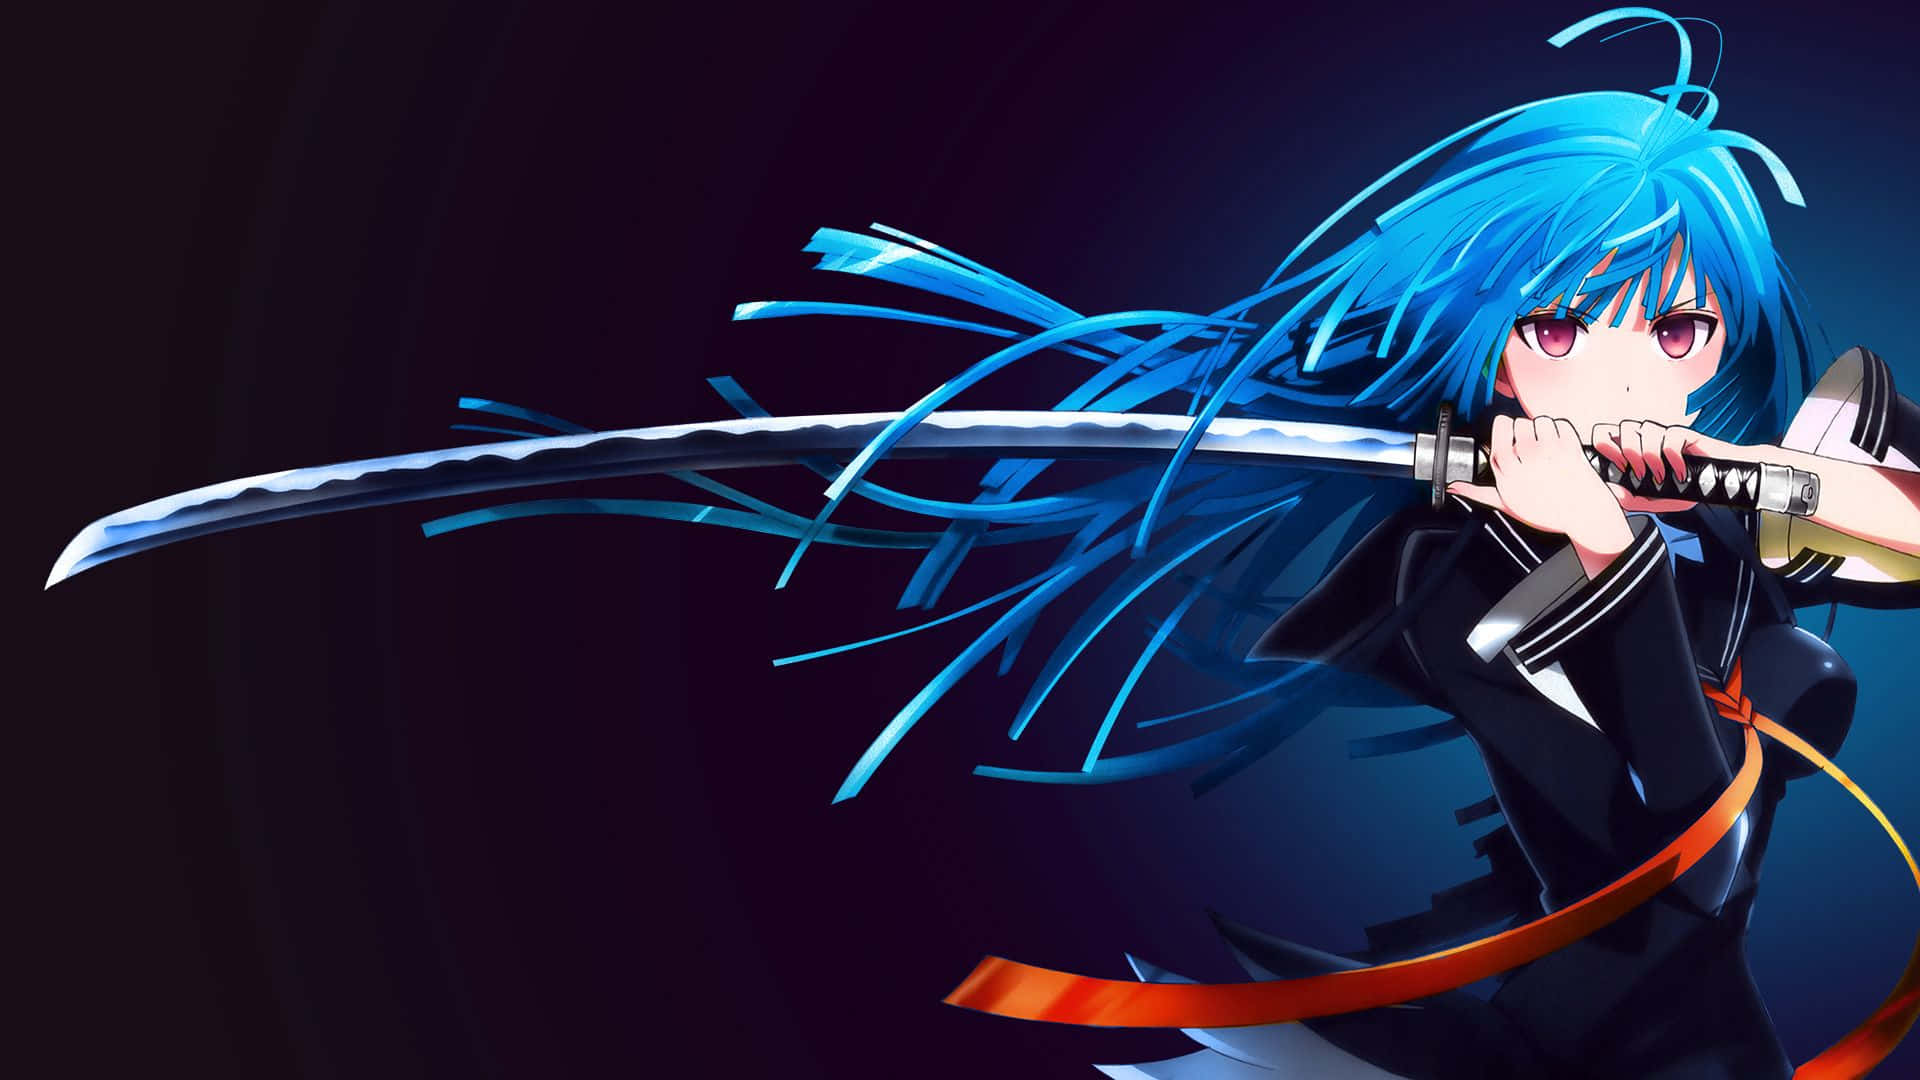 Unlock the Fate of Humanity in Black Bullet